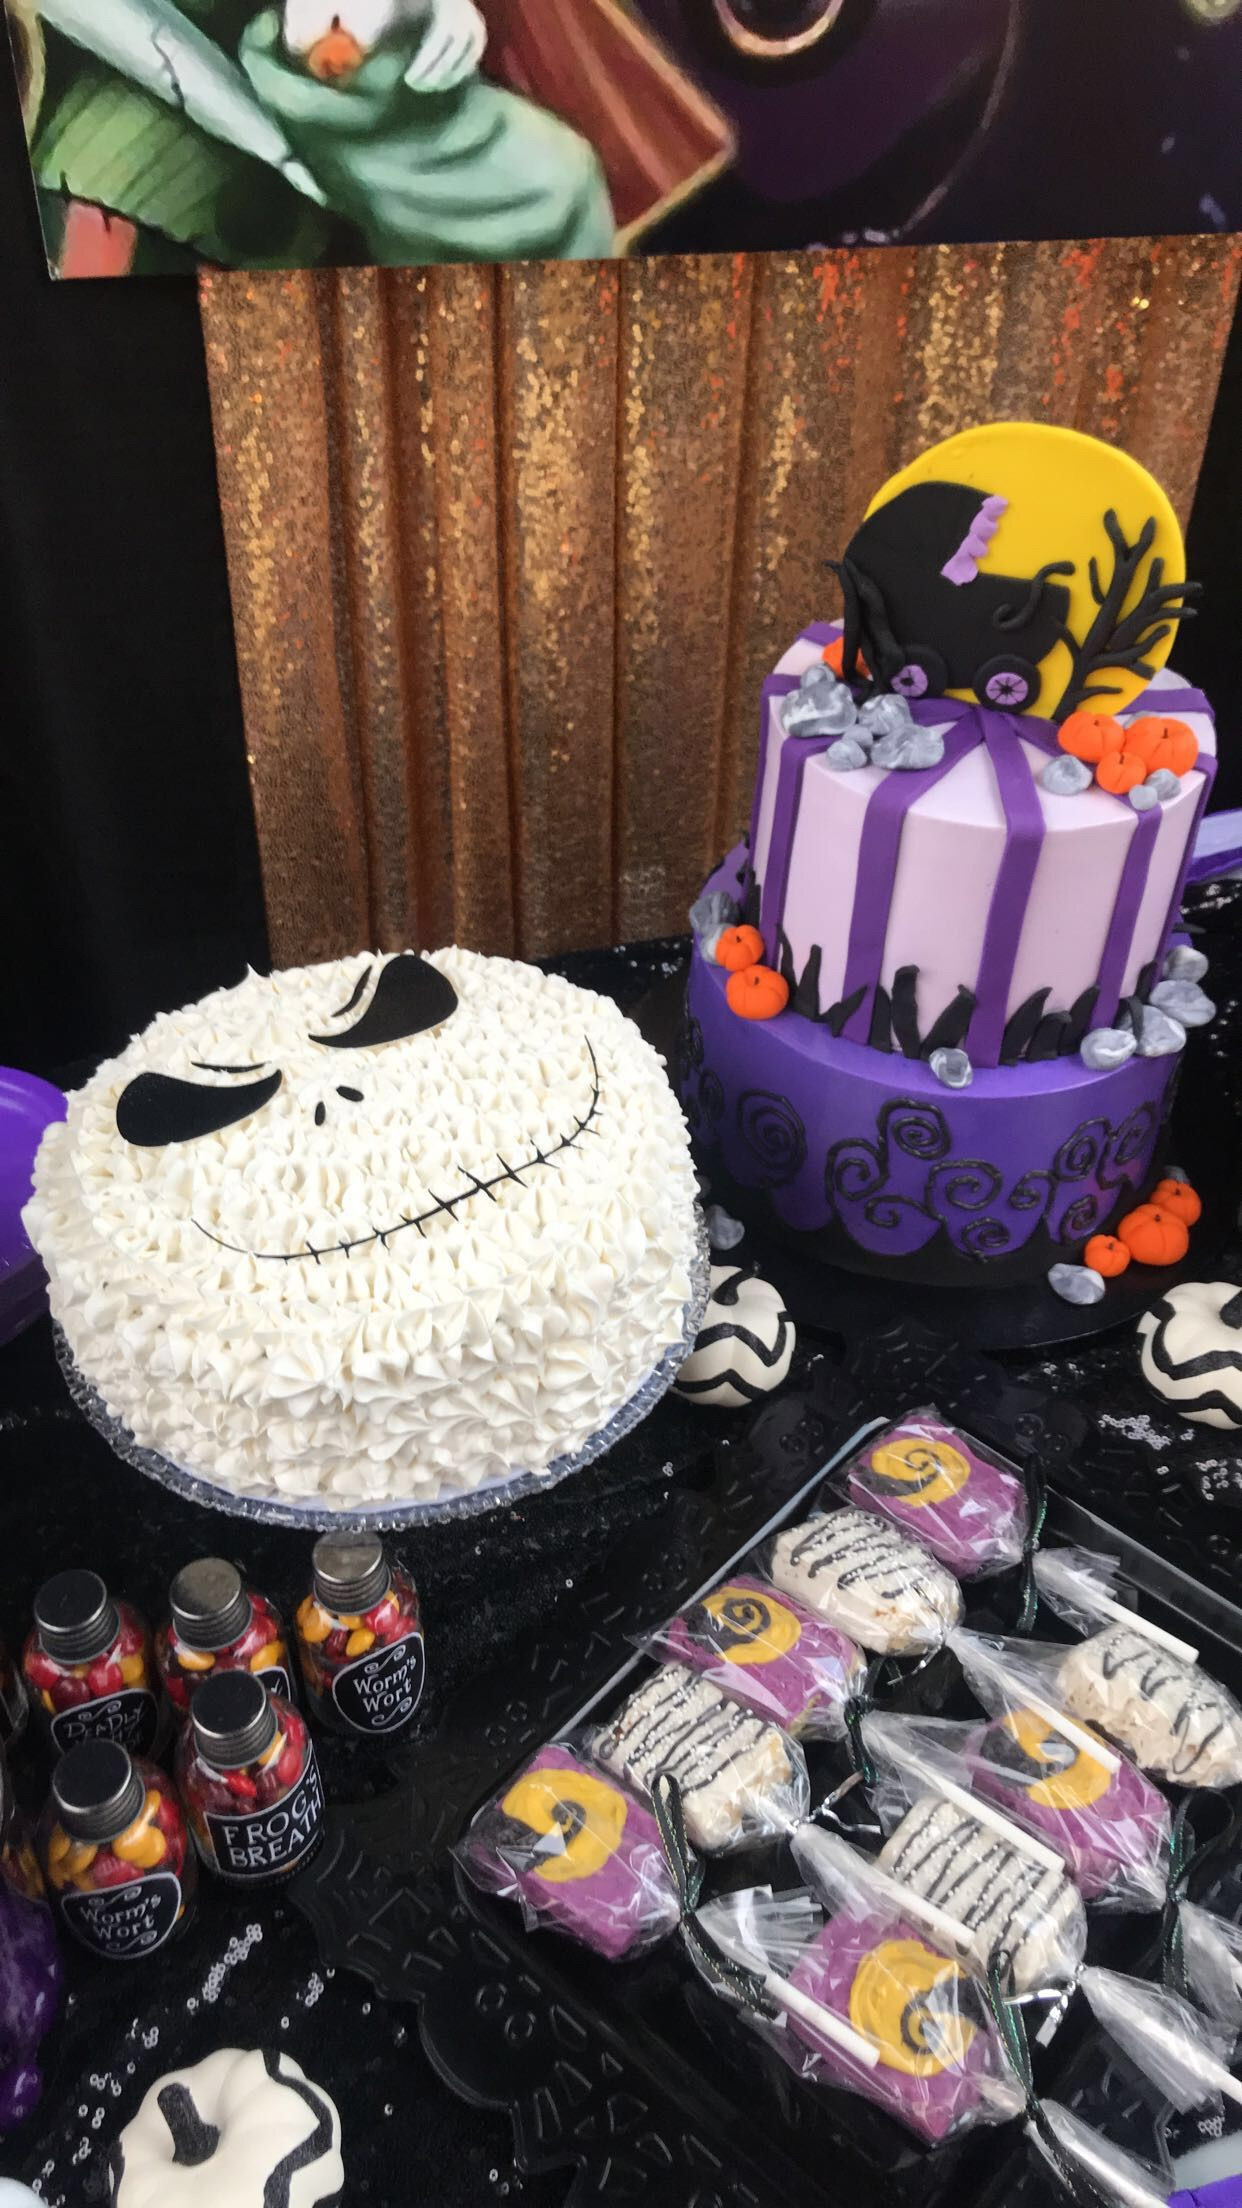 Nightmare Before Christmas Baby Shower Party Ideas
 The Nightmare Before Christmas image by Kirsty Lovelock